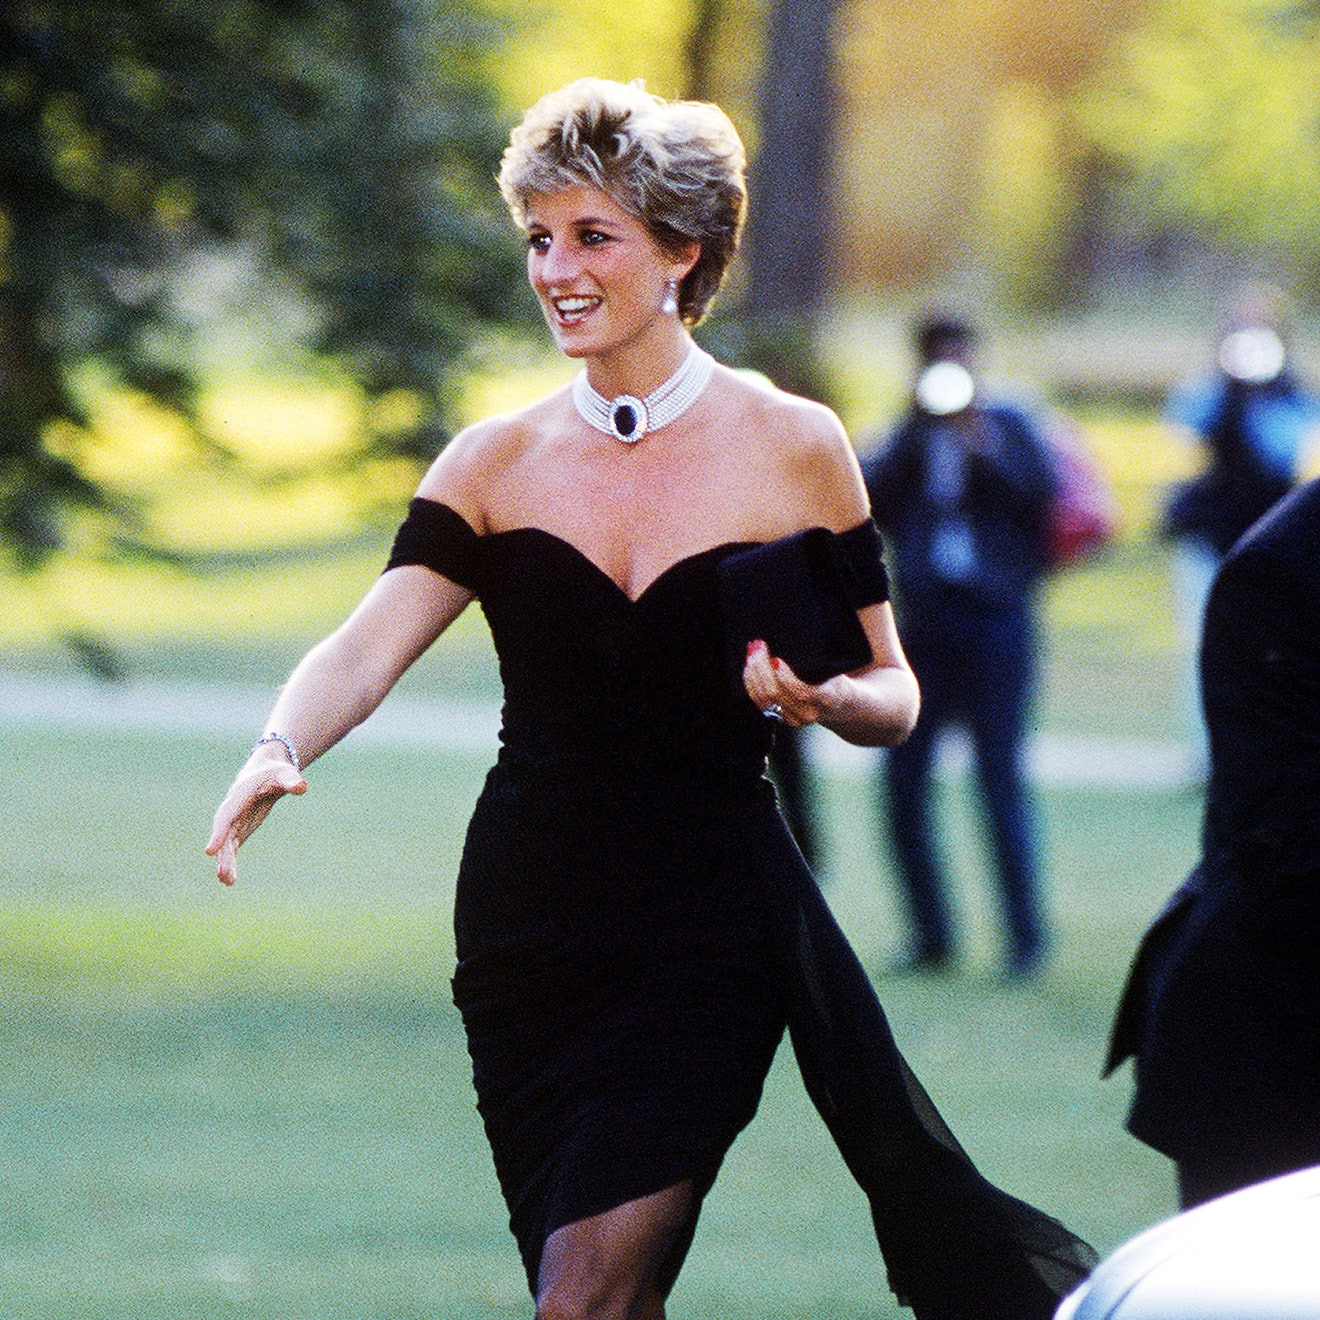 After Splitting From Charles, Princess Diana Wanted to Celebrate Her Independence. The Summer of 1994 Was When Her New Life Began